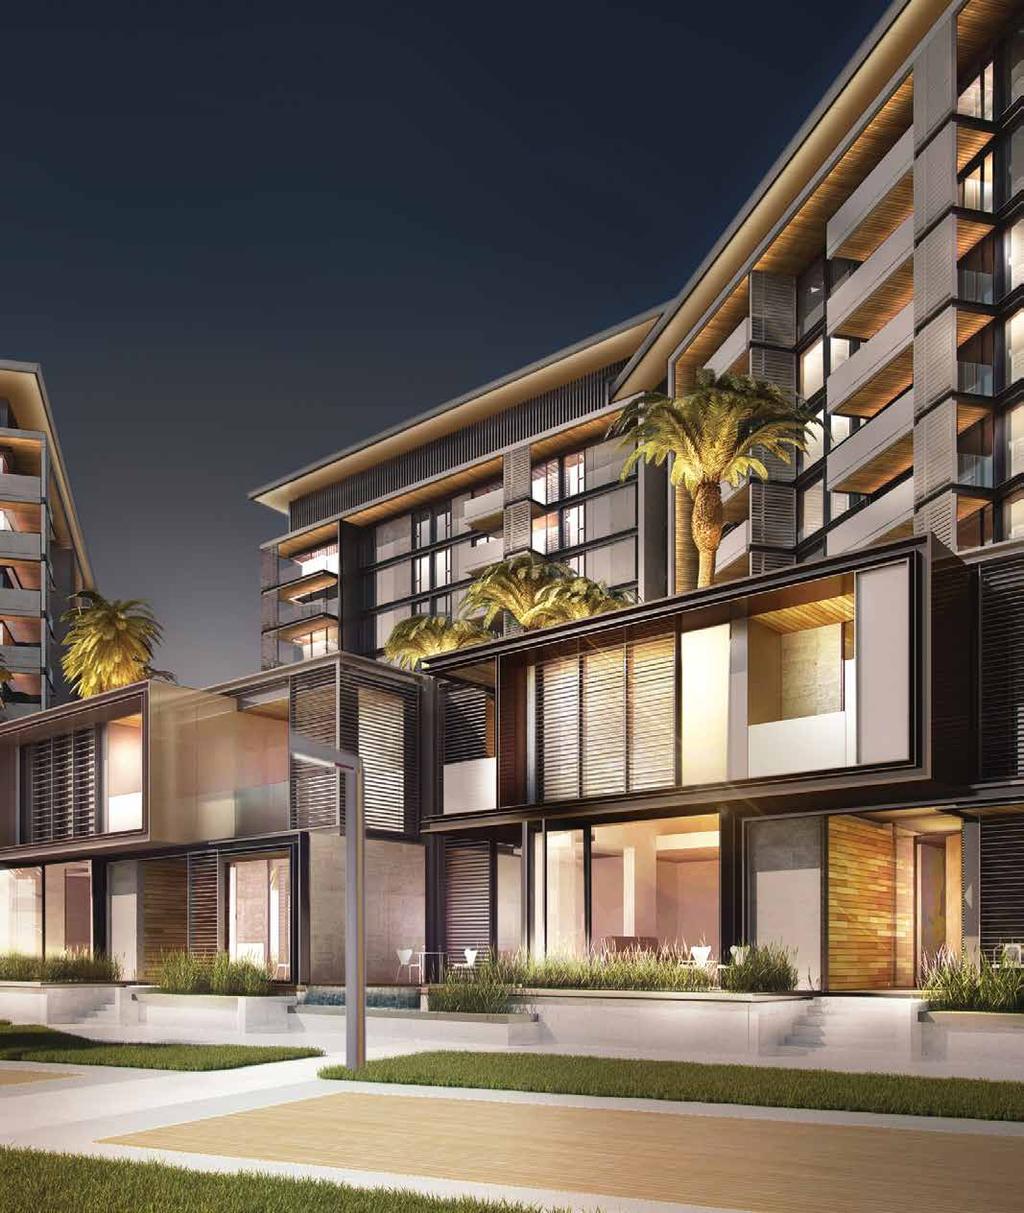 Bluewaters residences Bluewaters residences comprises 10 apartment buildings, 4 penthouses, and 17 townhouses.